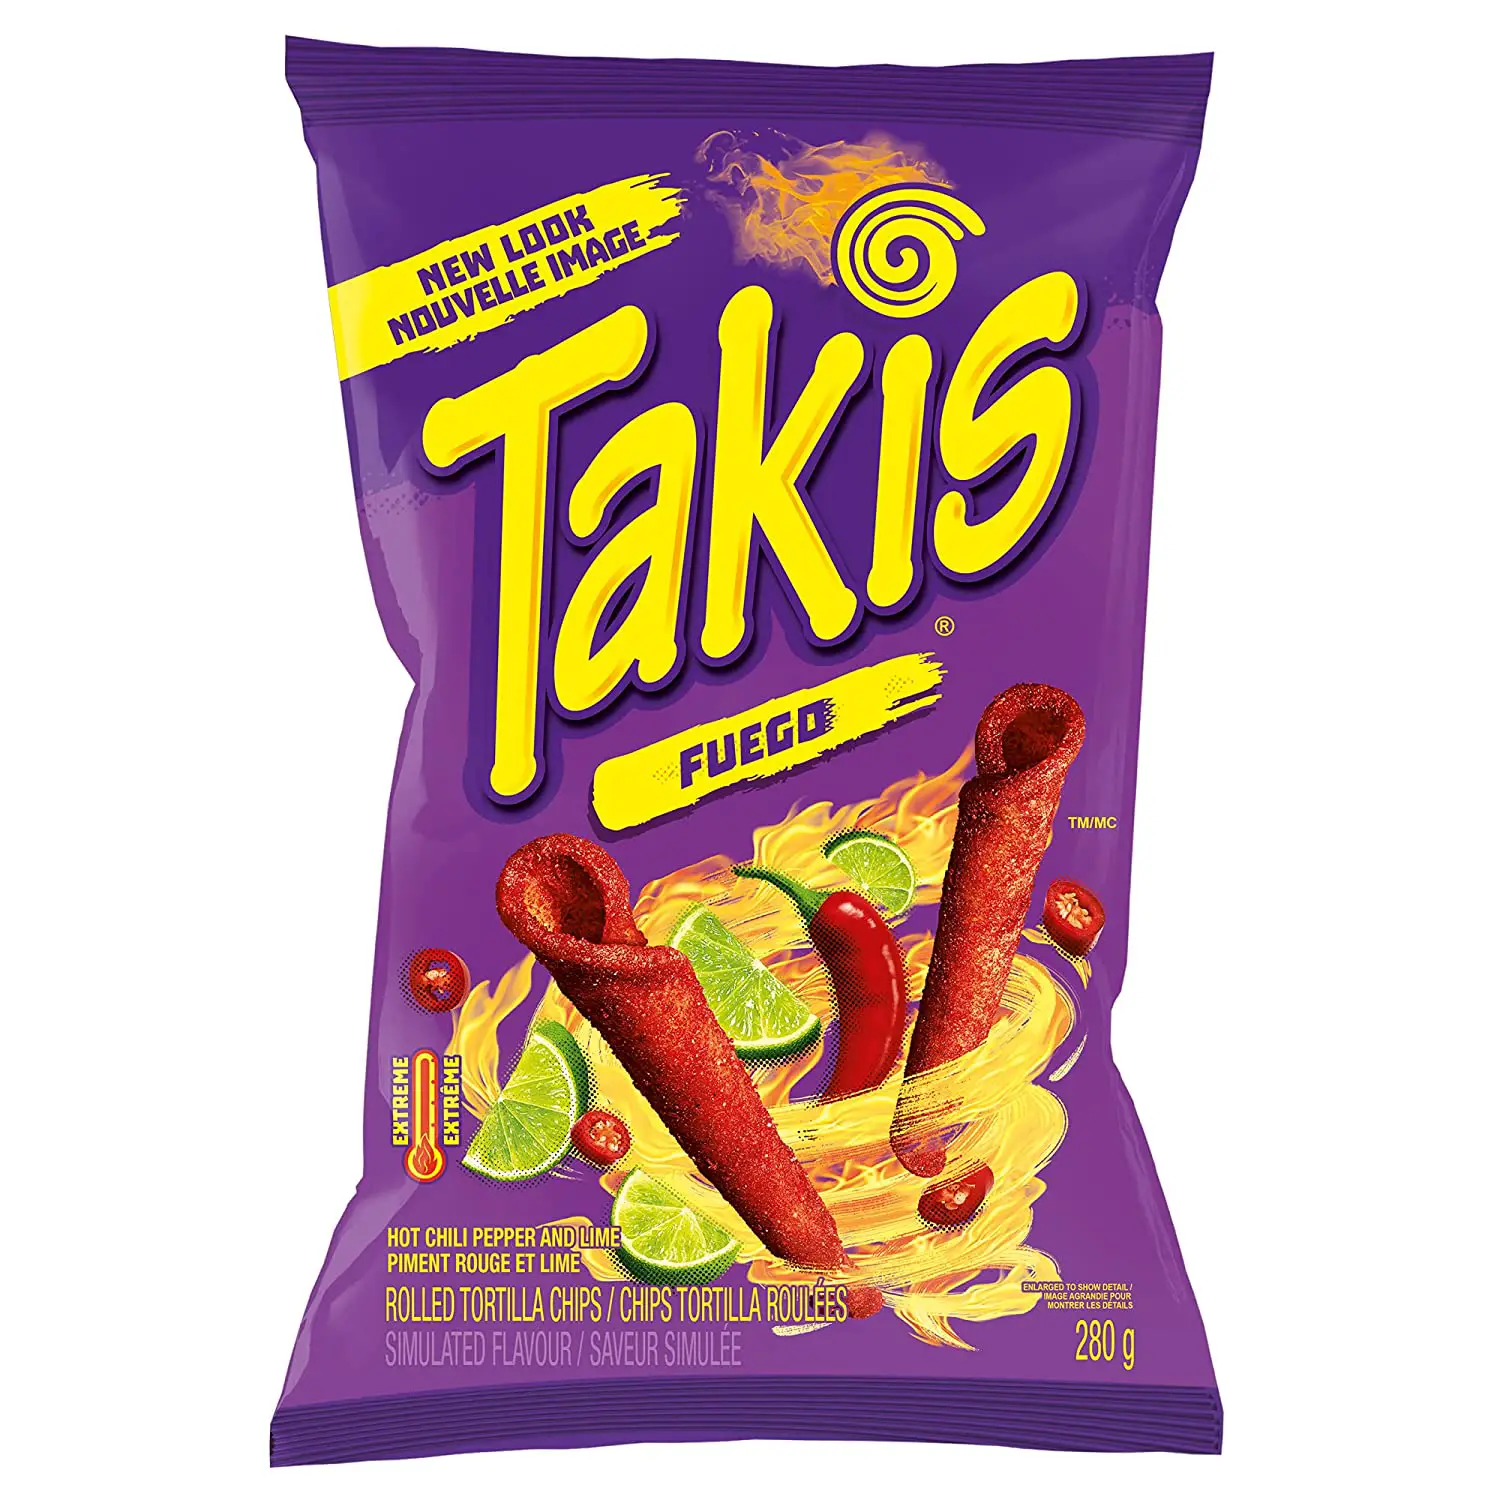 Are Takis Halal Or Haram?